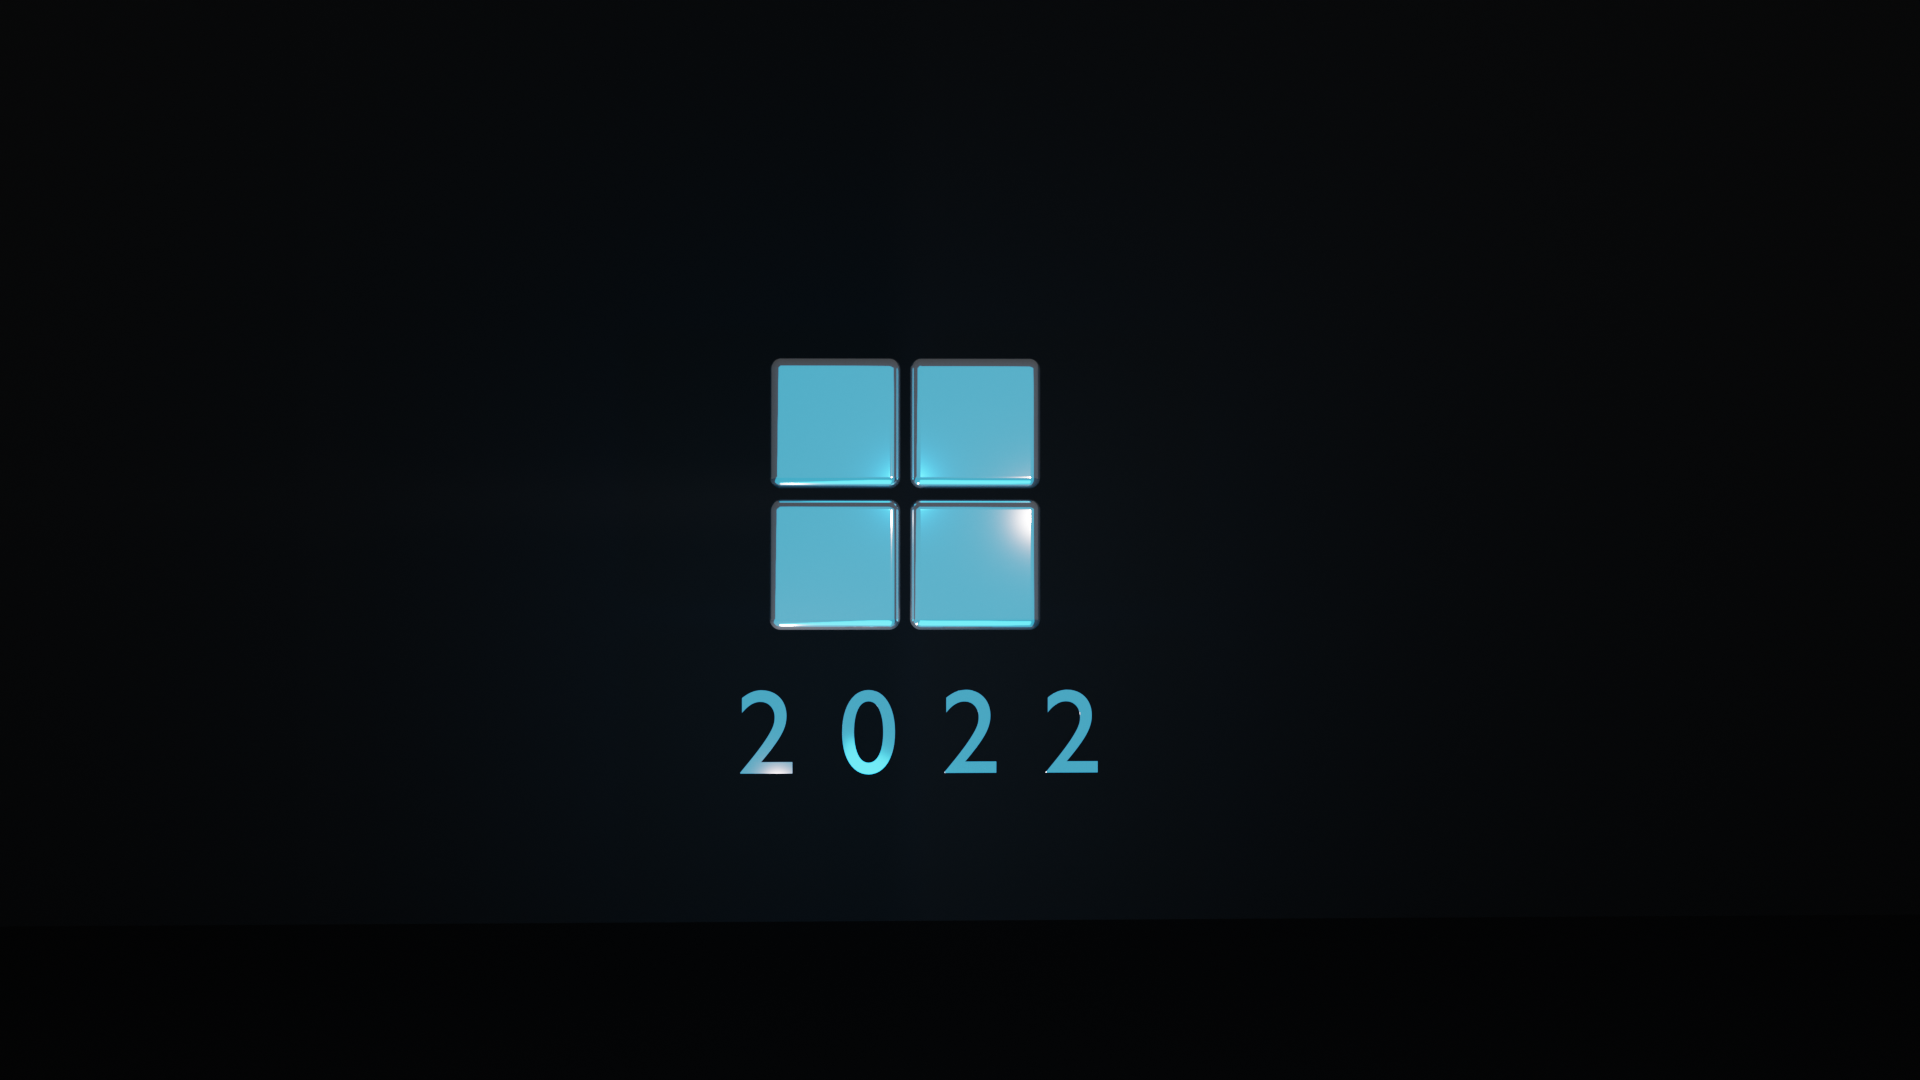 General 1920x1080 2022 (year) New Year Windows 11 operating system